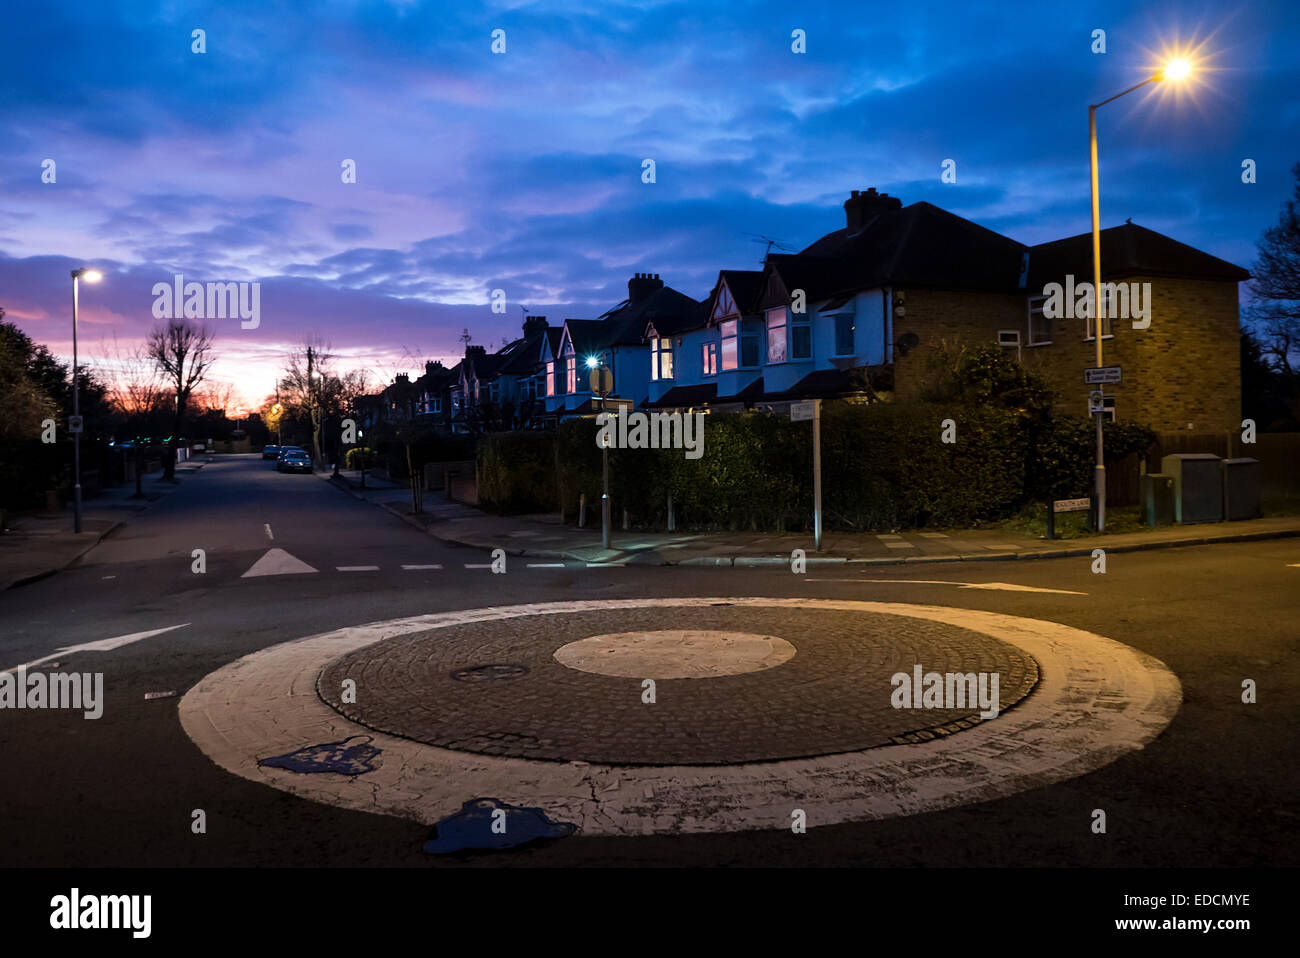 General View of the UK Roundabout, residential area in the evening, houses present Stock Photo